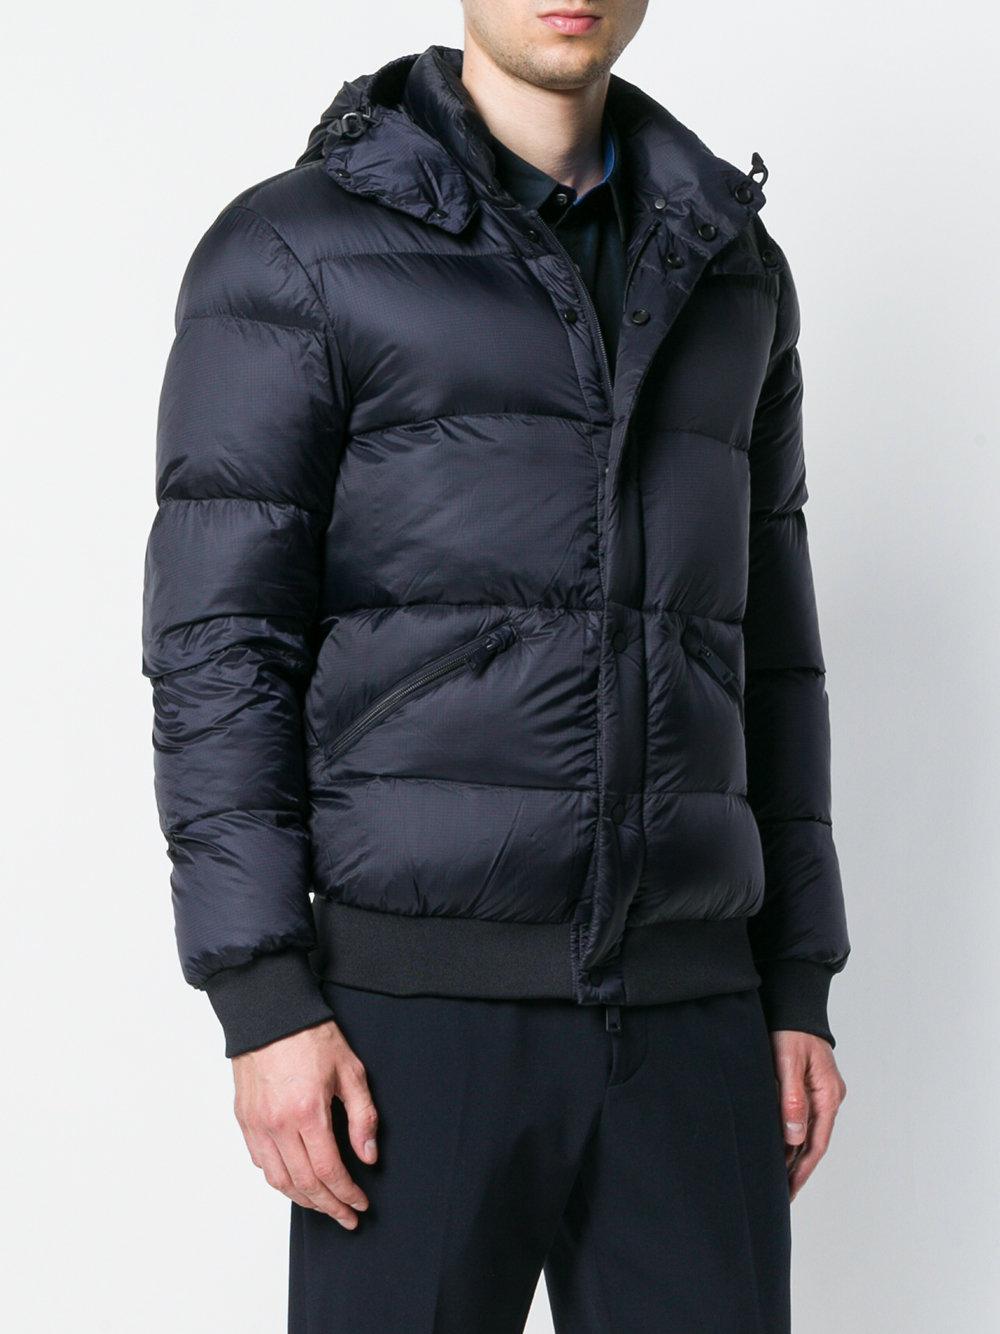 Emporio Armani Synthetic Padded Hooded Jacket in Blue for Men - Lyst